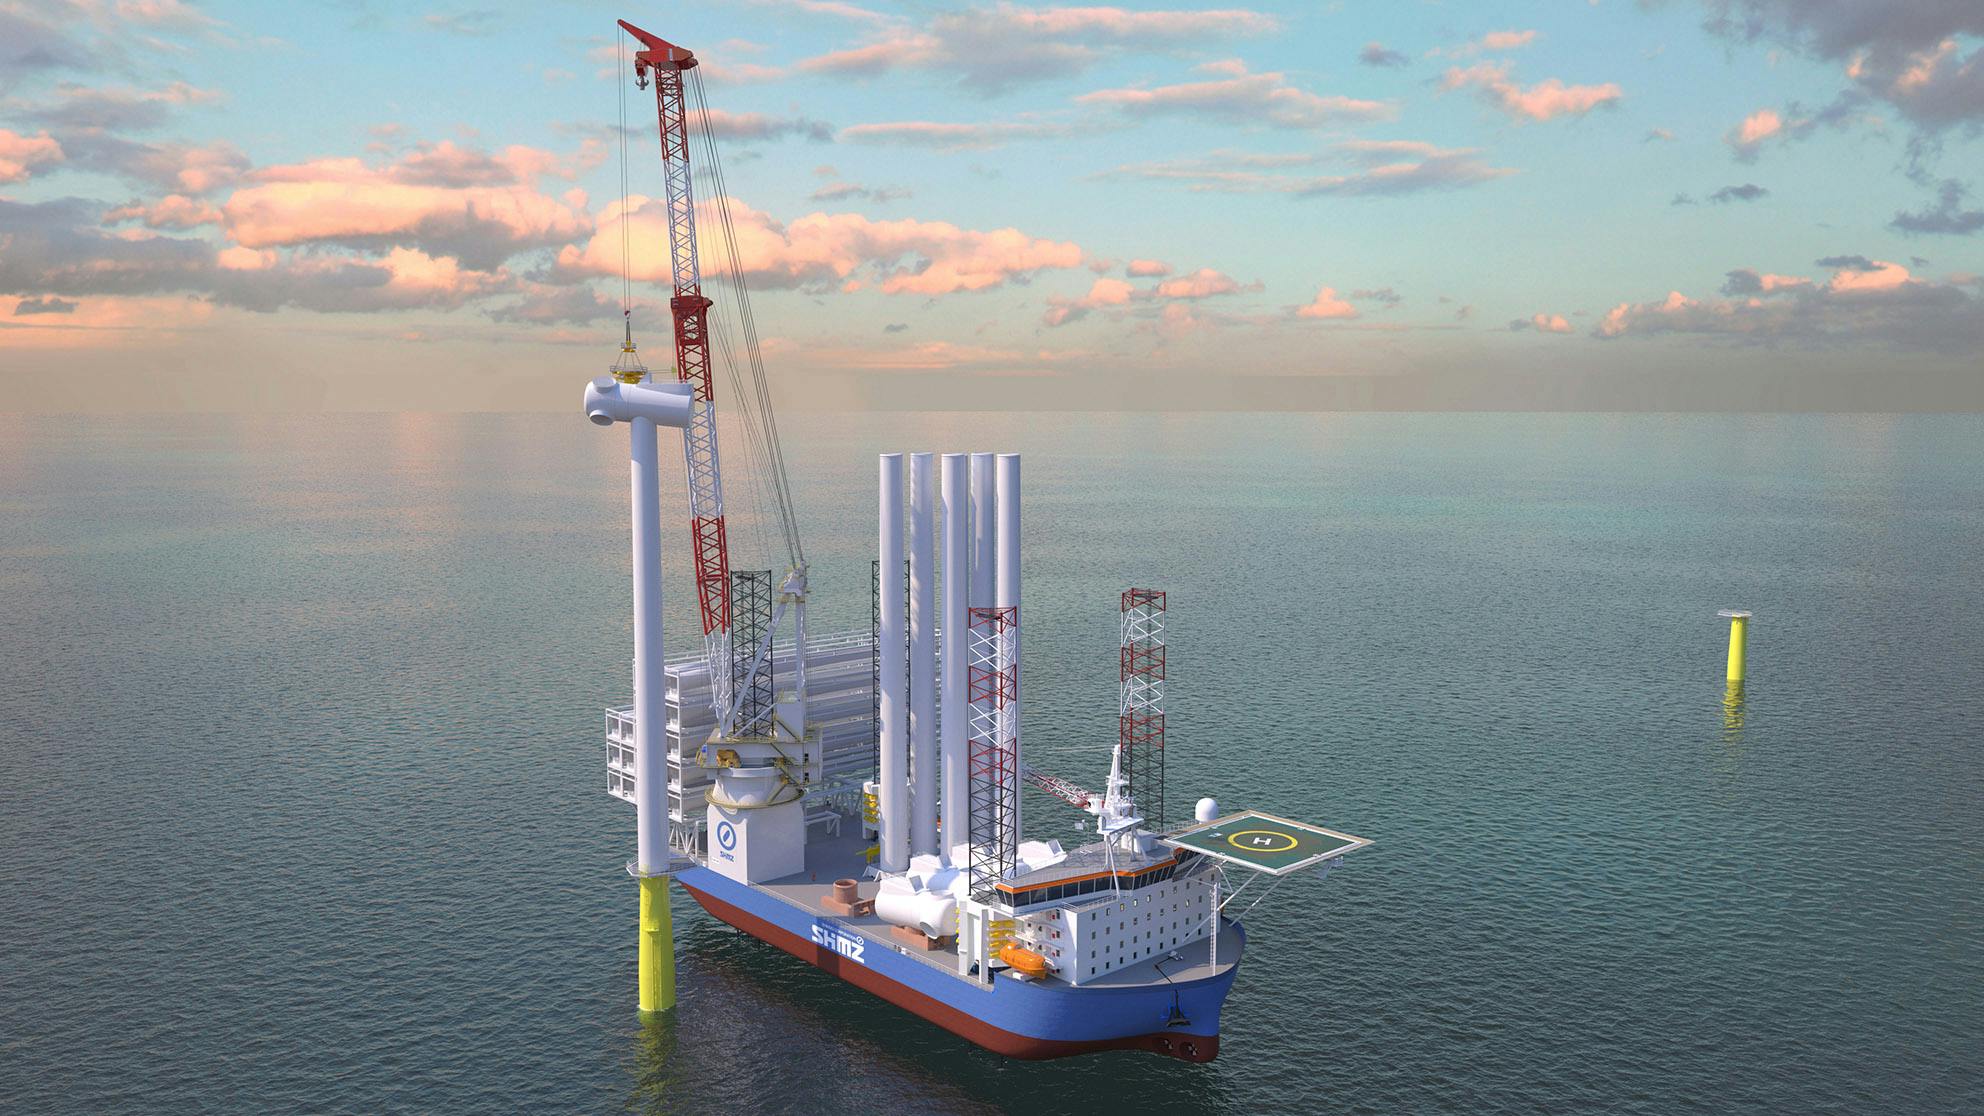 render of a crane lifting and assembling offshore wind turbines